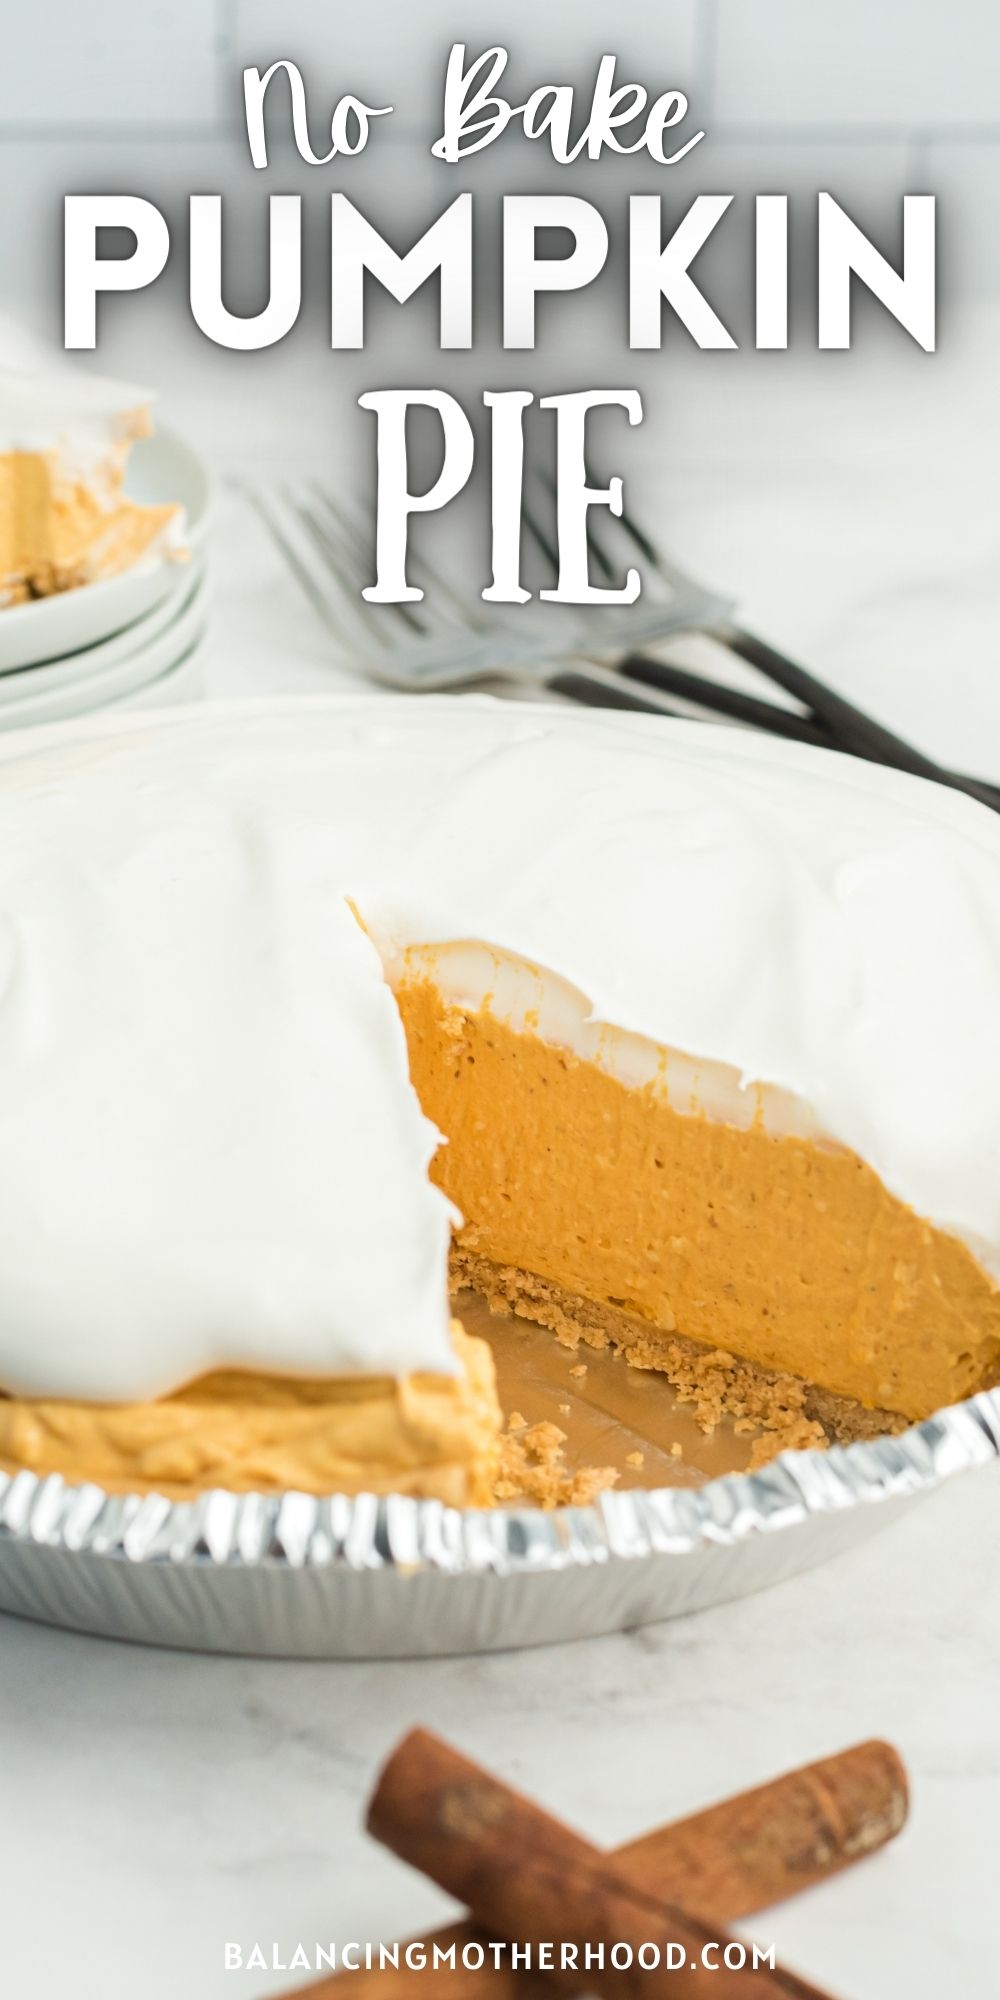 Cool Whip pumpkin pie is creamy and fluffy version of traditional pumpkin pie. This no bake pumpkin pie is filled with a pumpkin cream cheese mixture with whipped topping folded in. It's a perfect easy pie recipe for Thanksgiving or Christmas.